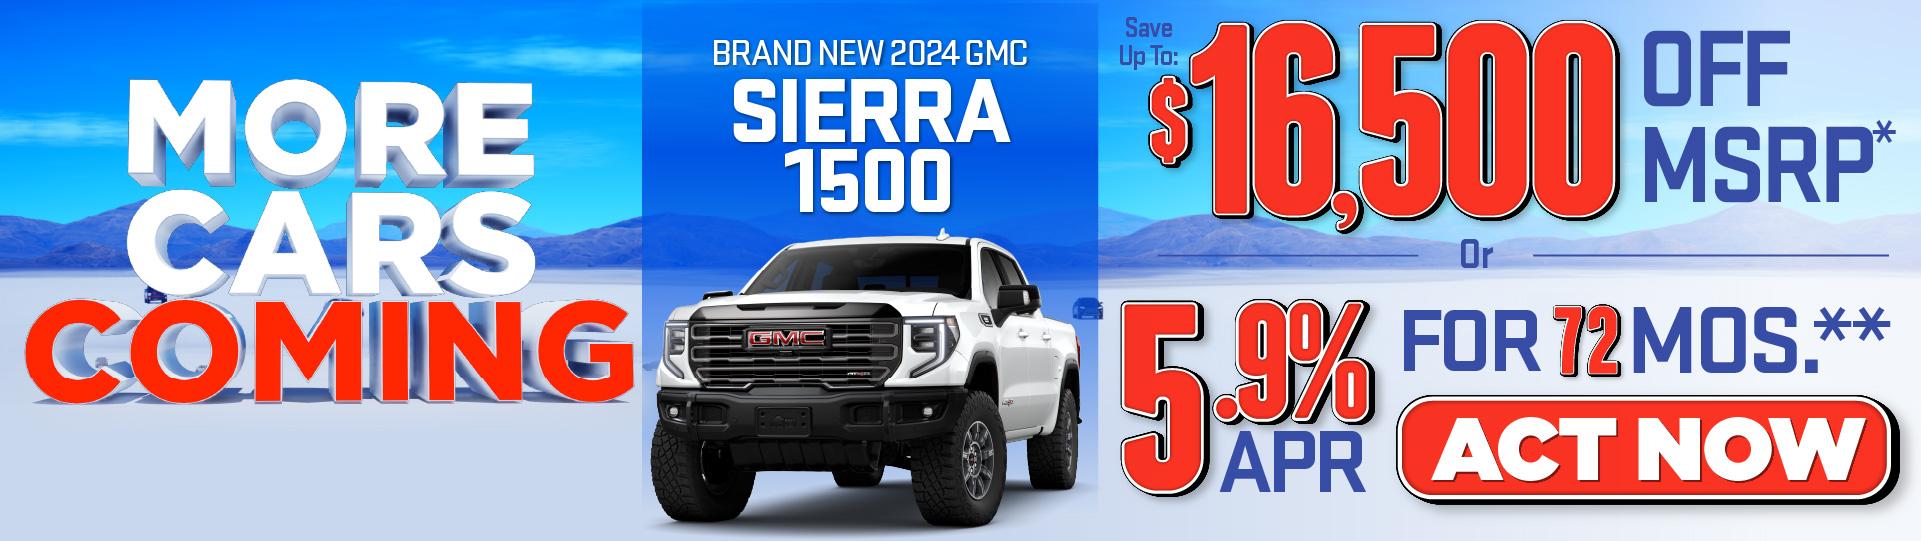 brand new sierra 1500 save up to $16,500 off MSRP*